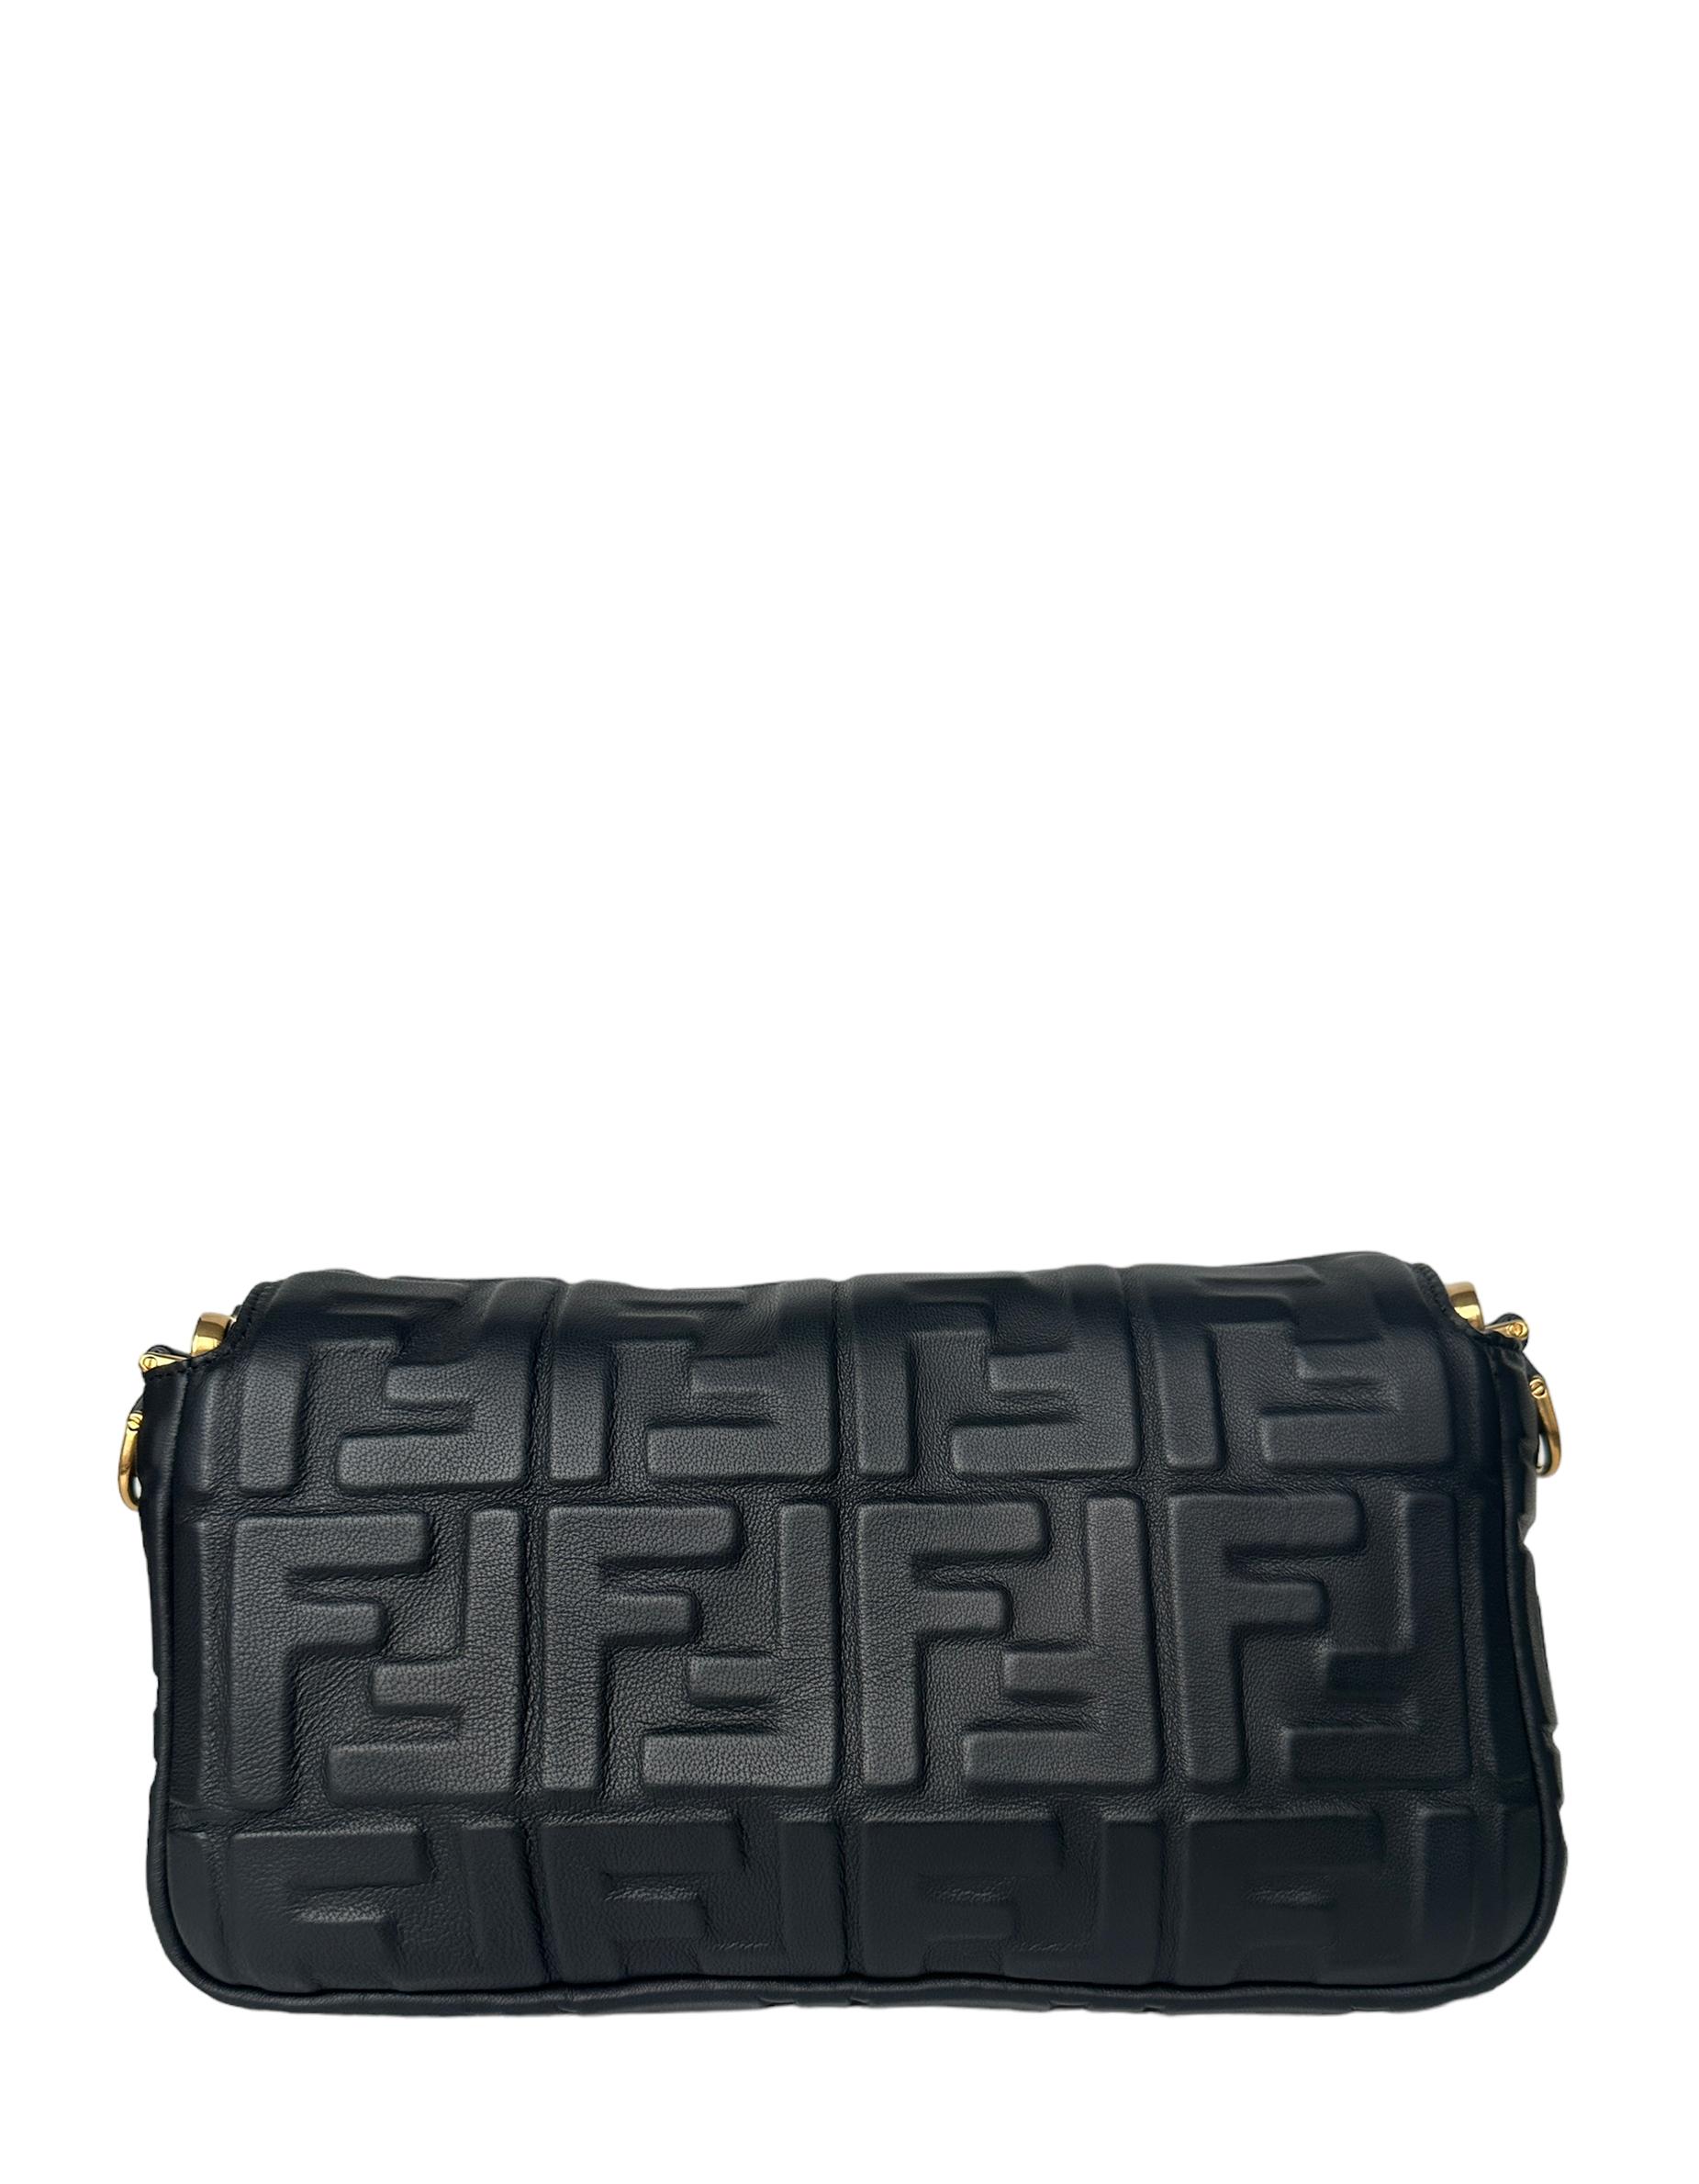 Fendi Black Nappa Embossed Logo FF 1974 Medium Baguette NM Bag w/ Two Straps

Made In: Italy
Color: Black
Hardware: Goldtone
Materials: Nappa leather
Lining: Textile
Closure/Opening: Flap top with magnetic closure
Exterior Pockets: None
Interior